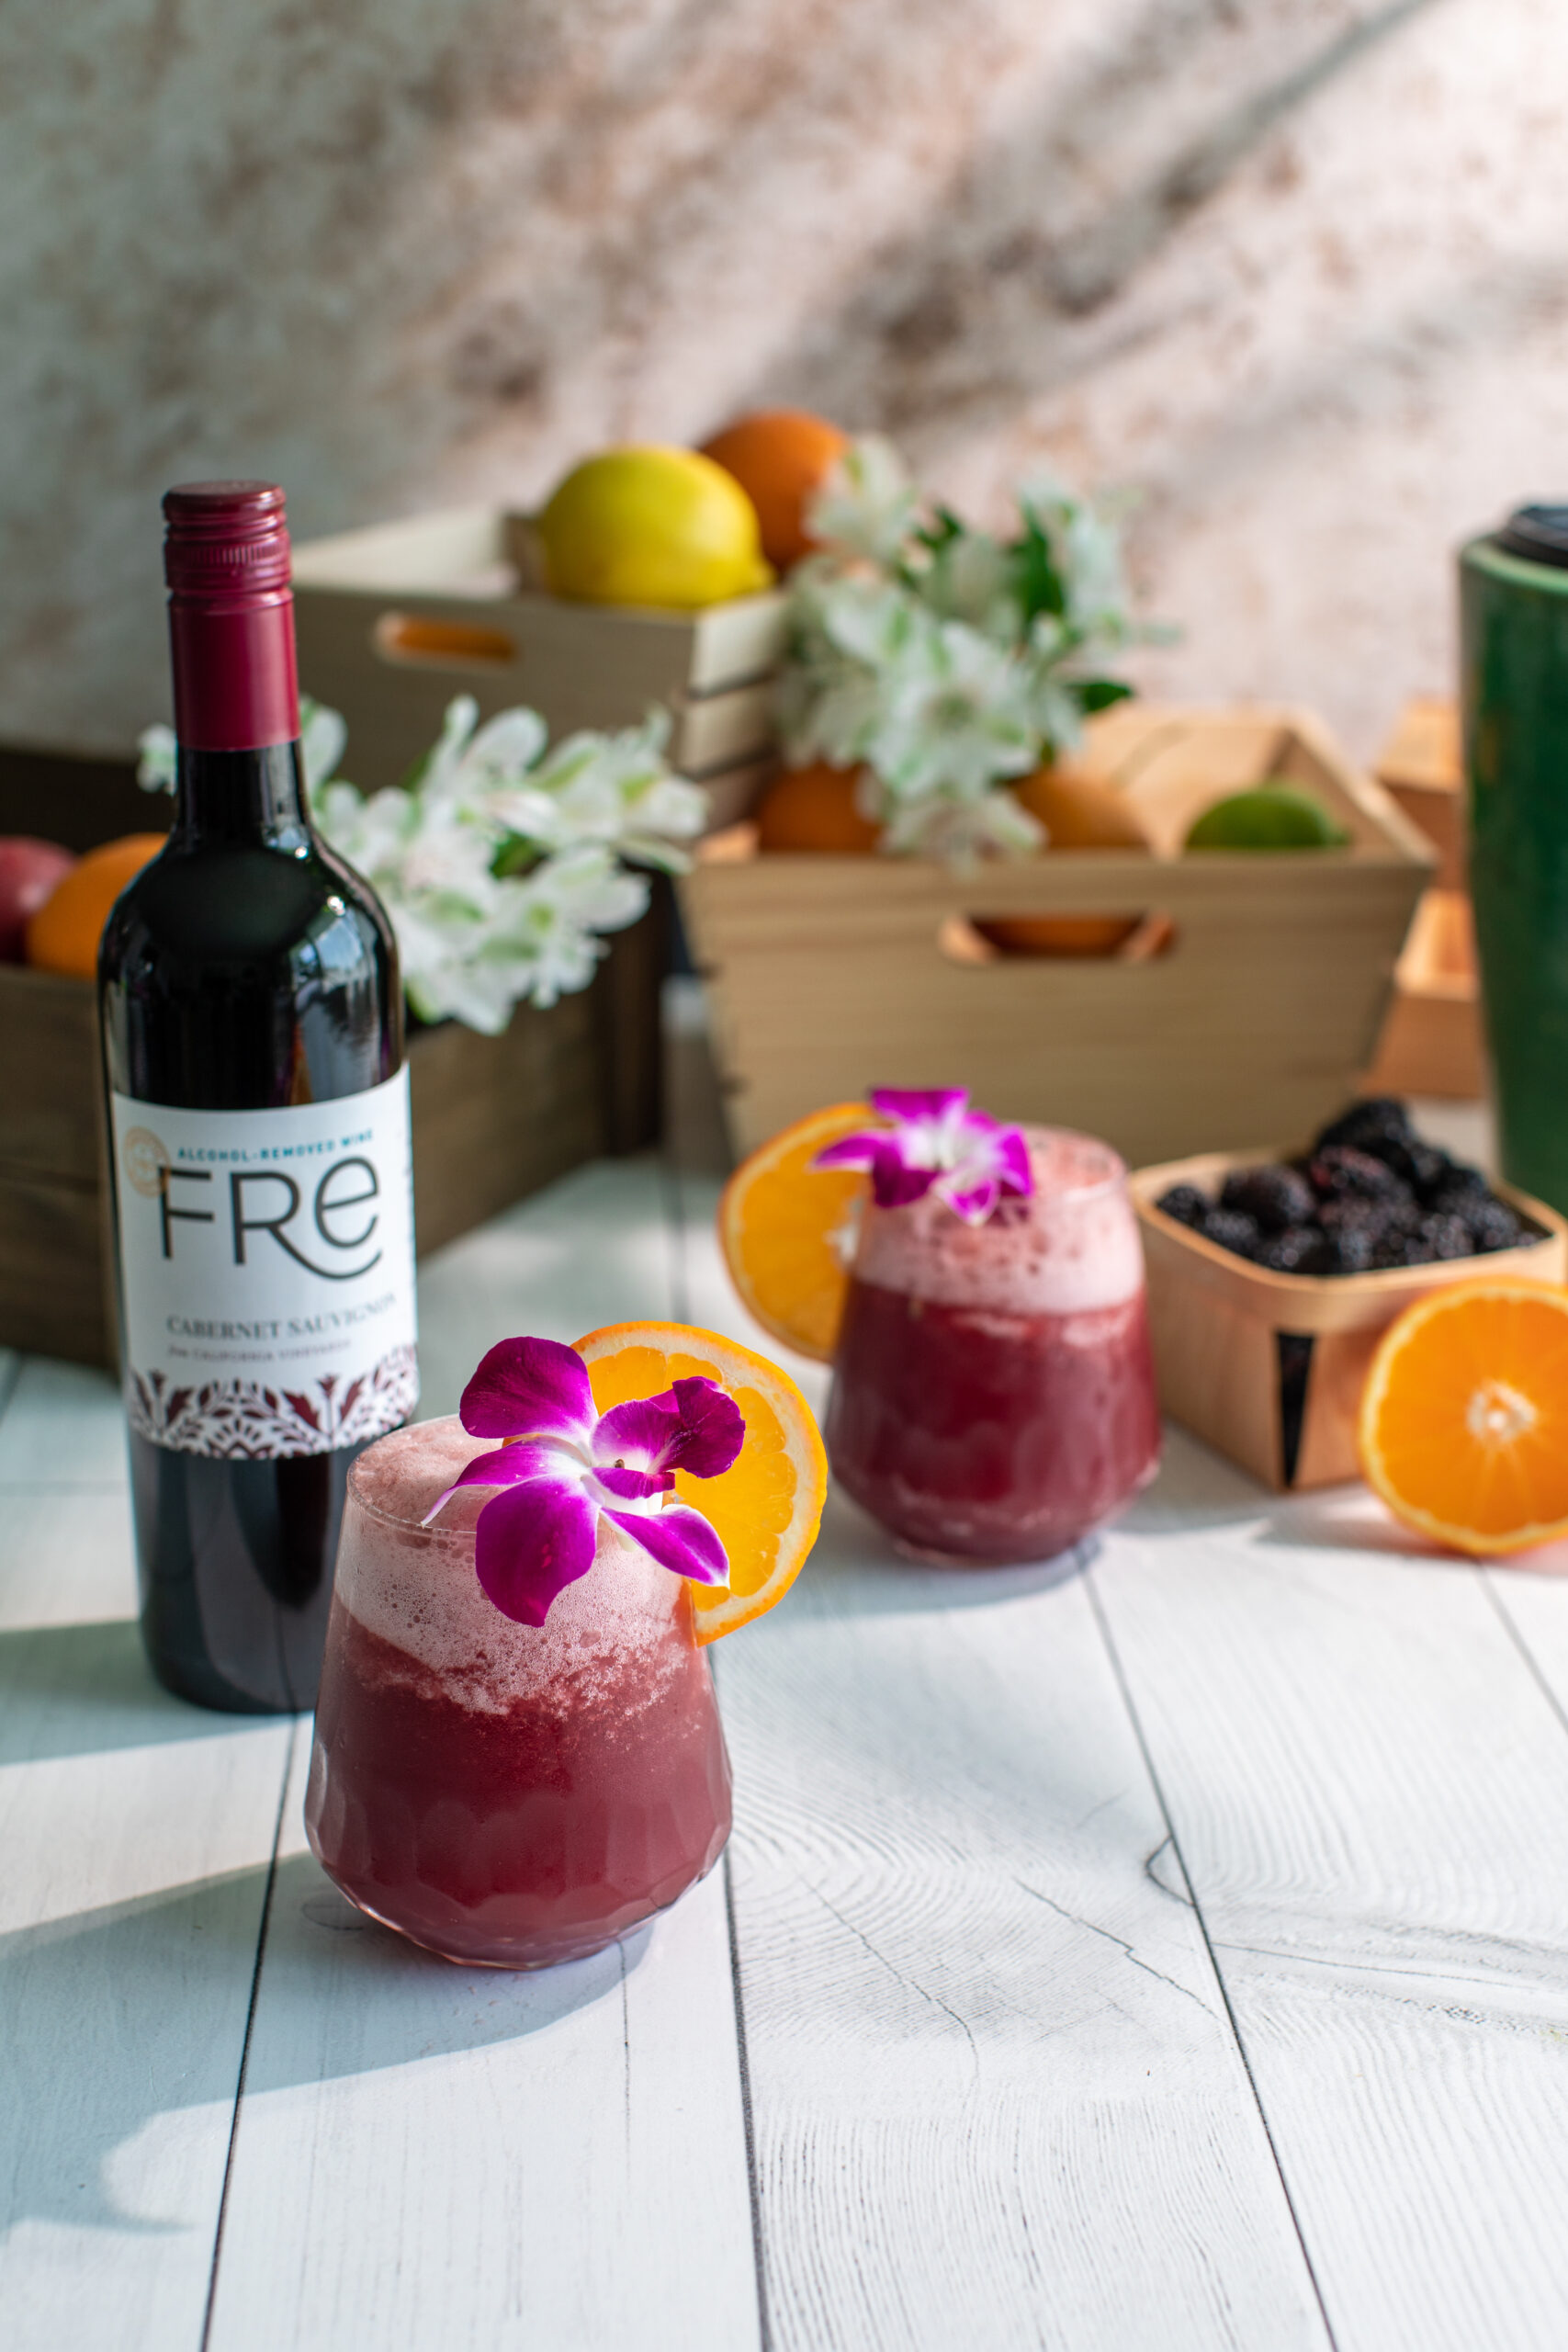 fre wines, fre, free, alcohol removed, sangria, alcohol removed red wine, alcohol free red wine, mocktails, wine cocktails, sangria, alcohol free sangria